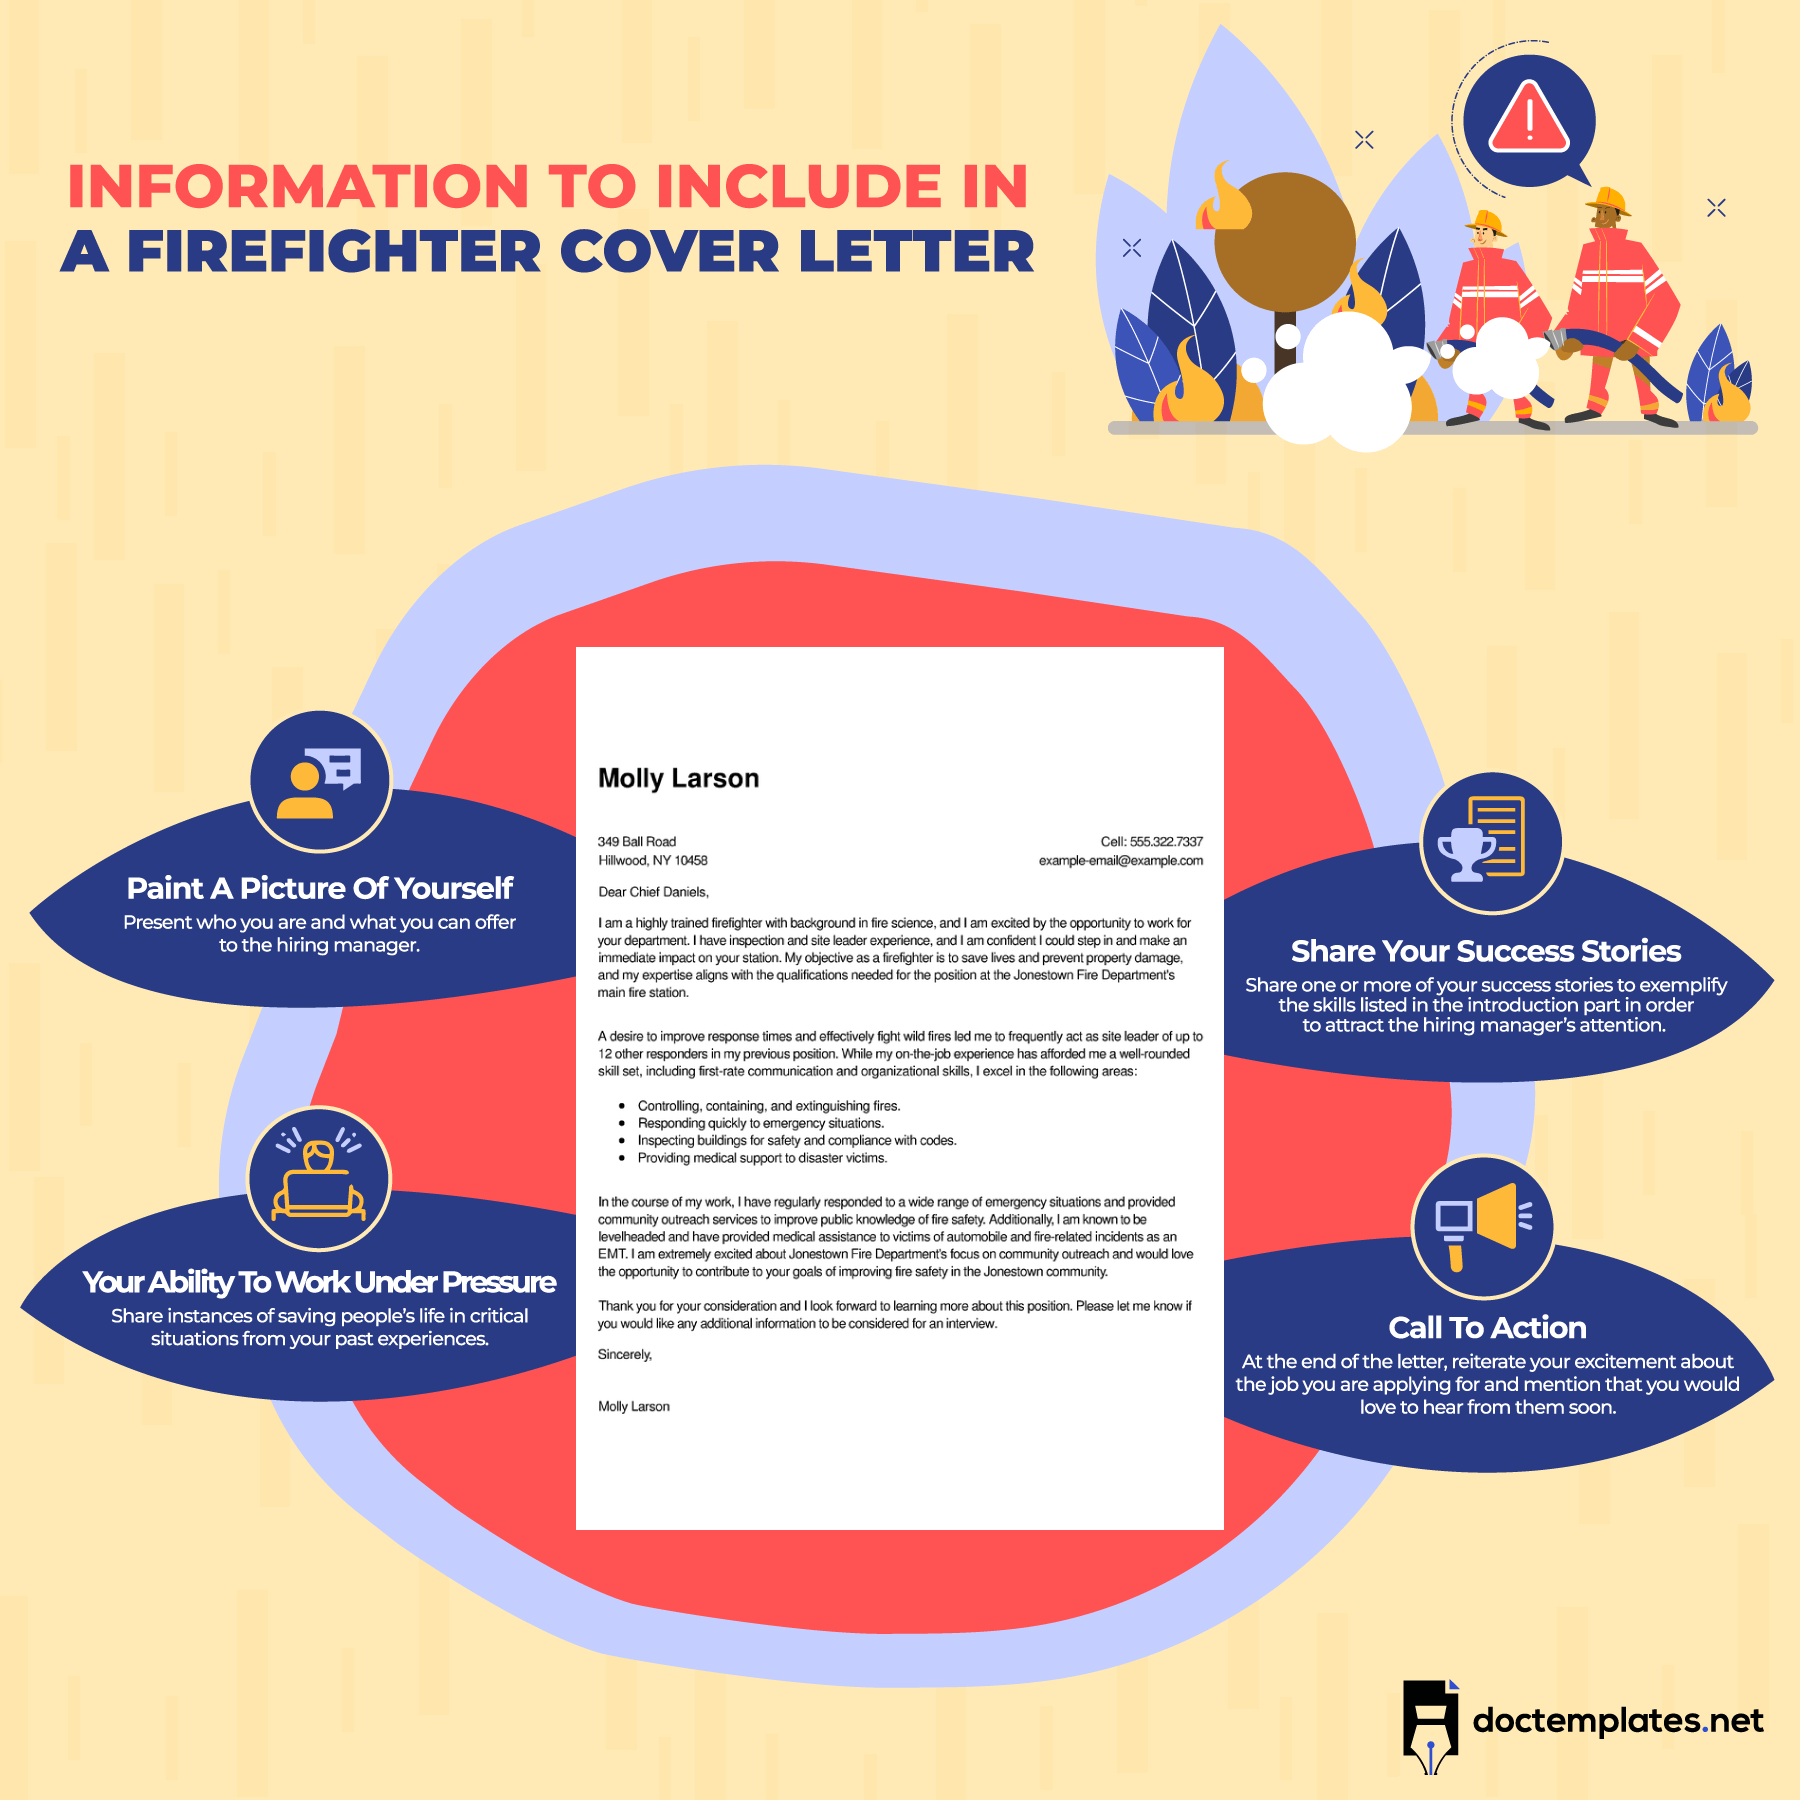 This infographic is about firefighter cover letter information.